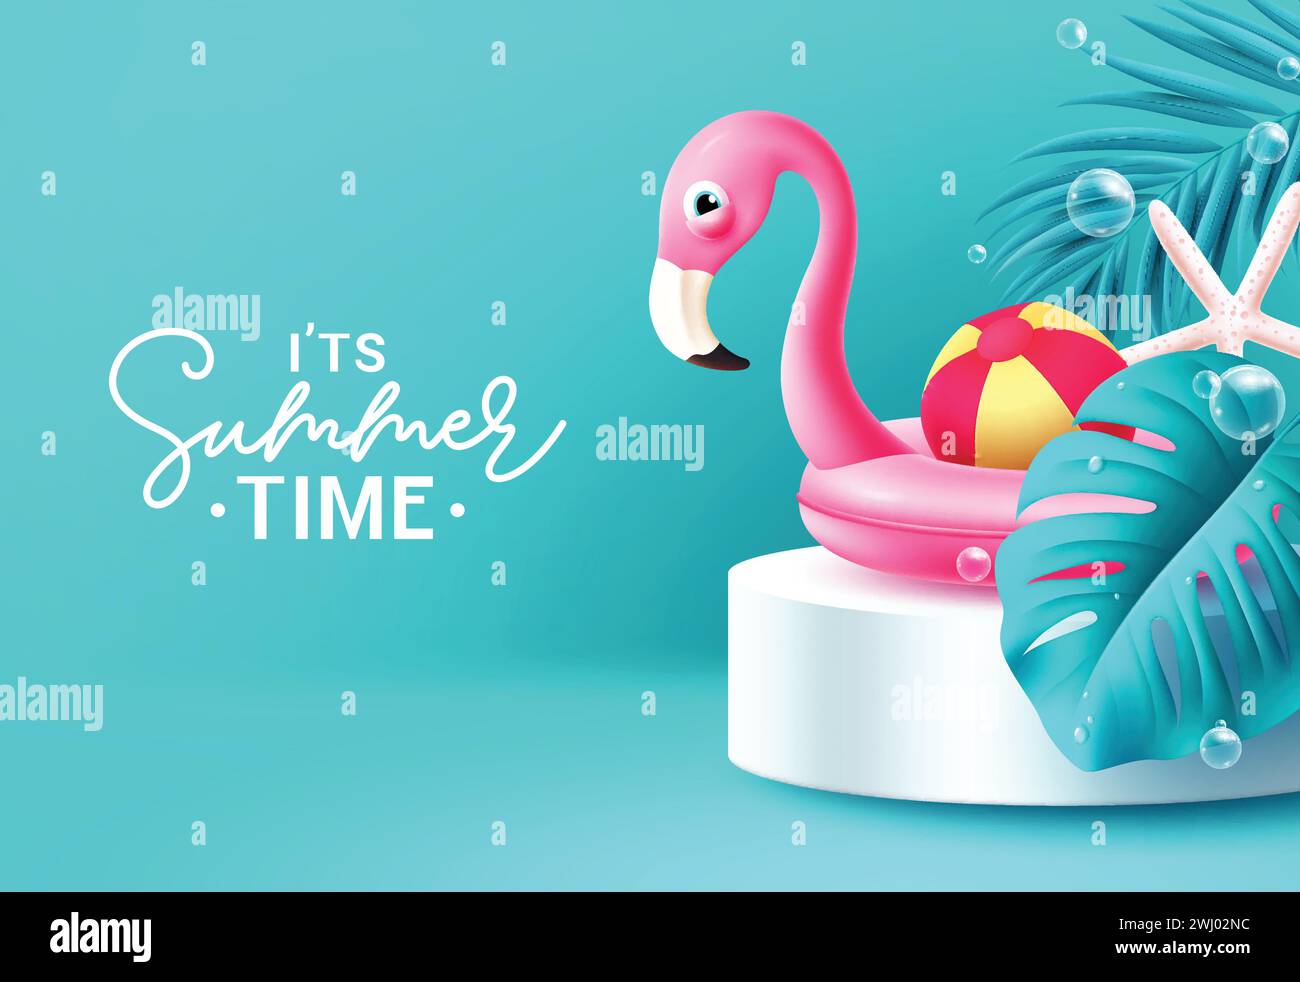 Summer time text vector banner design. It's summer time greeting with pink flamingo floaters and beachball in podium stage advertisement background. Stock Vector